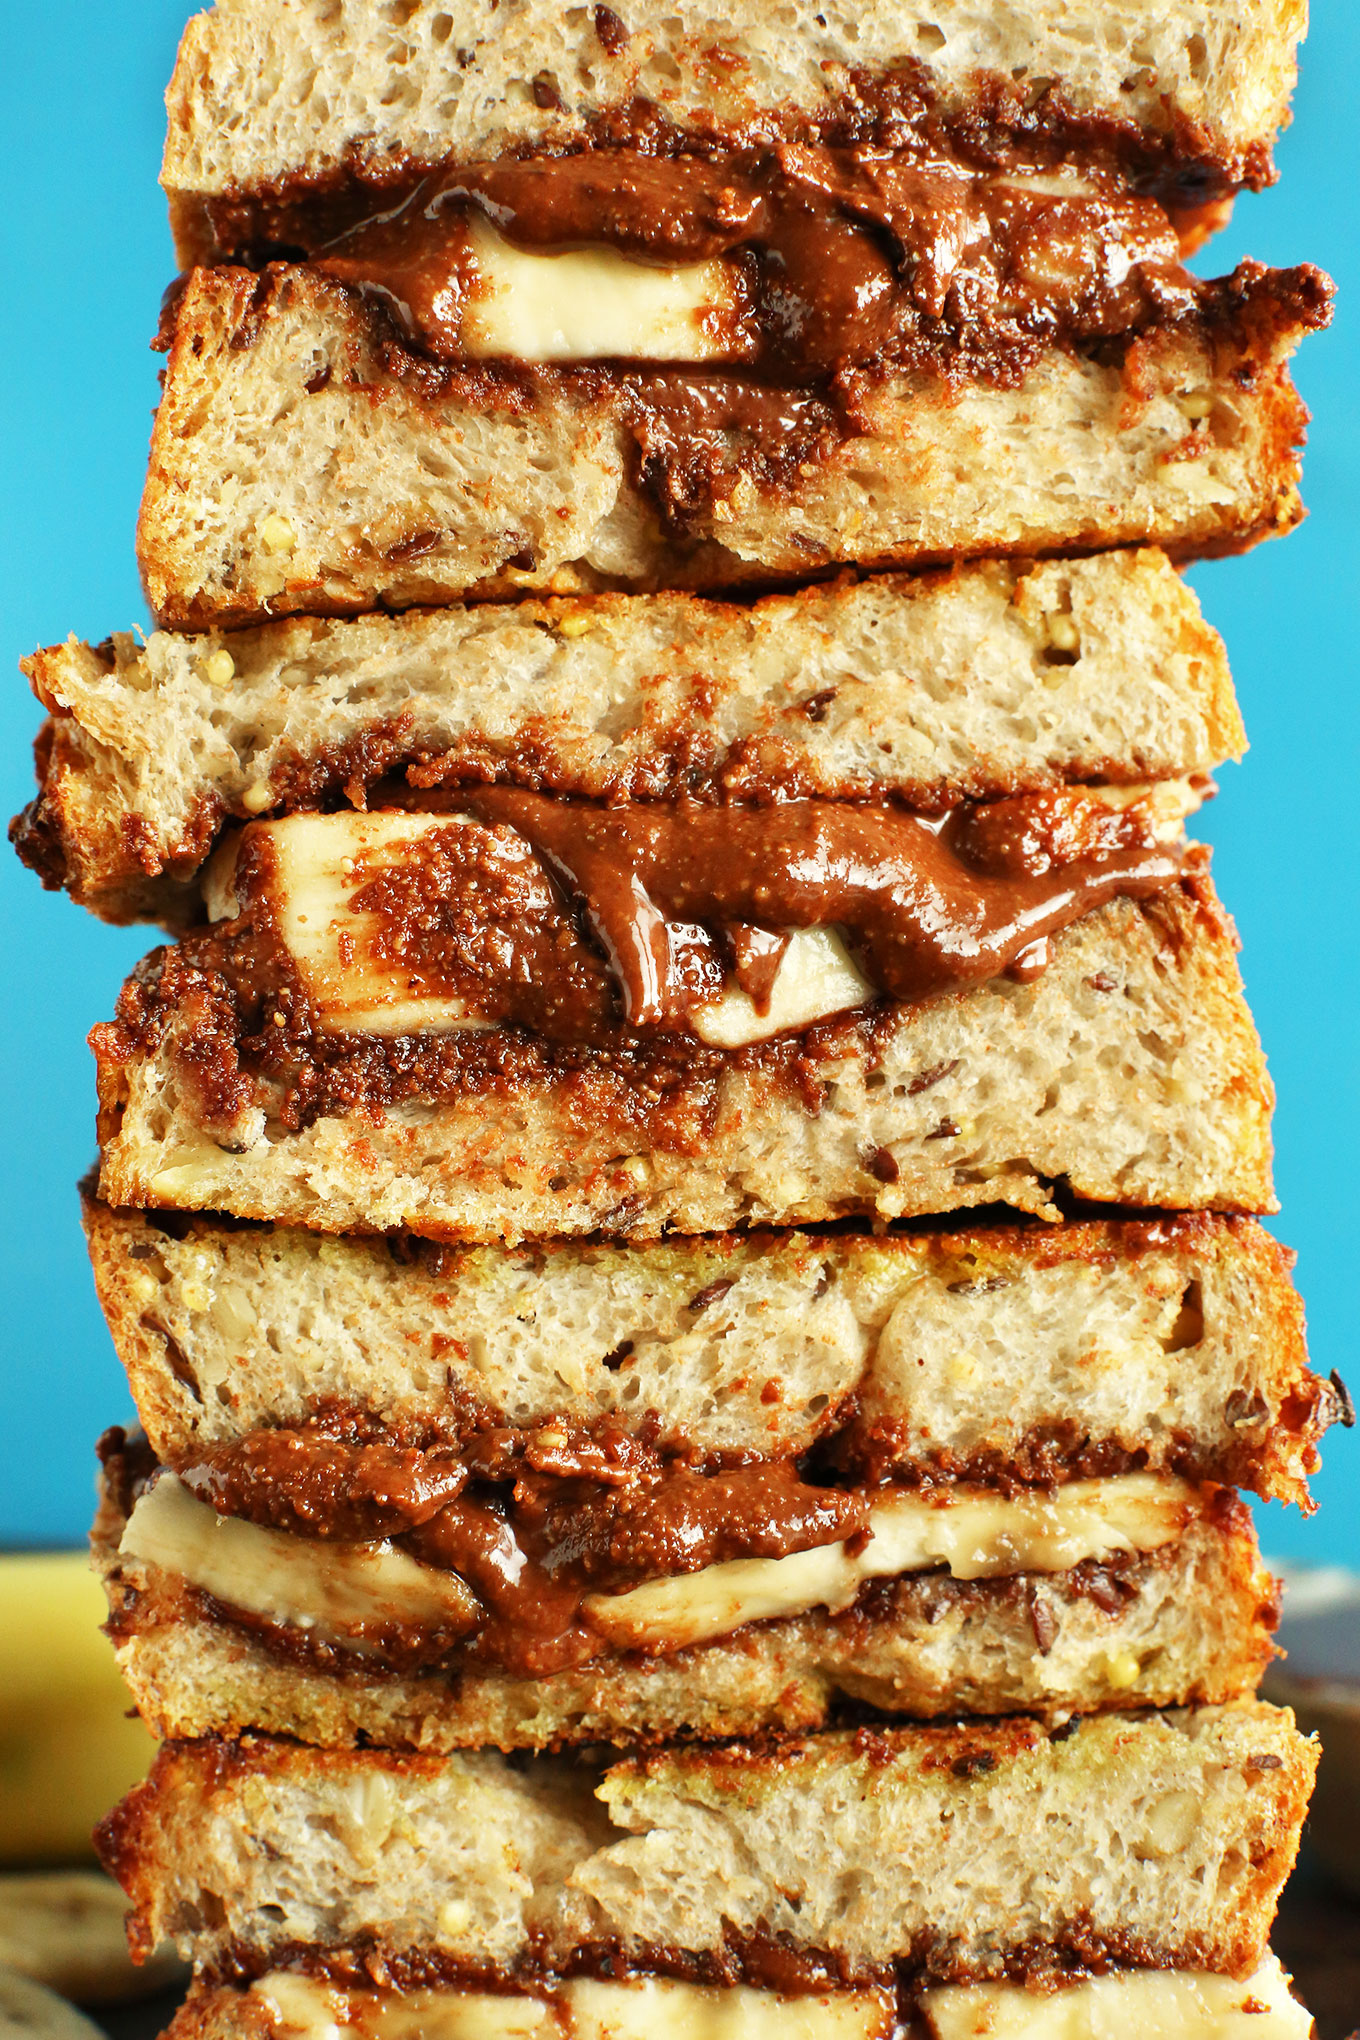 Close up shot of a stack of our delicious Banana Nutella Sandwiches